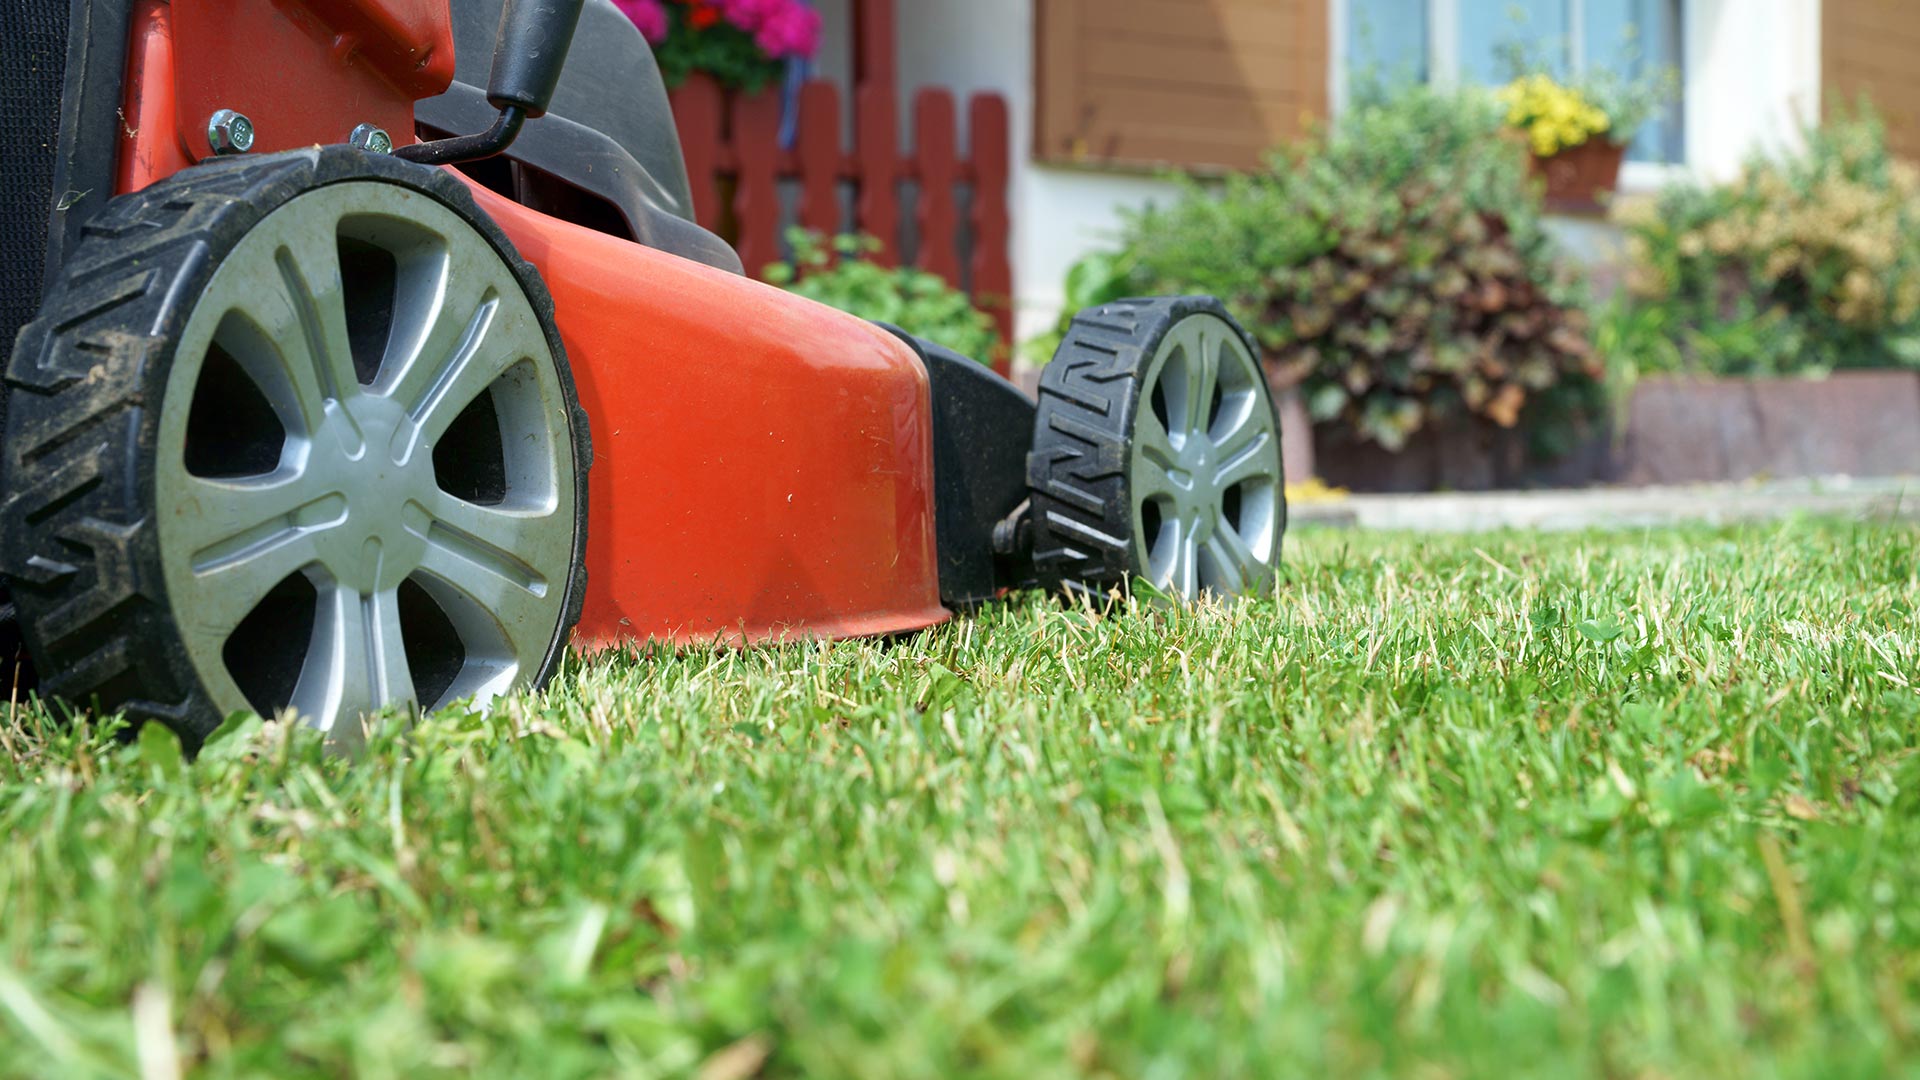 3 Mistakes You’re Likely Making When Mowing Your Lawn